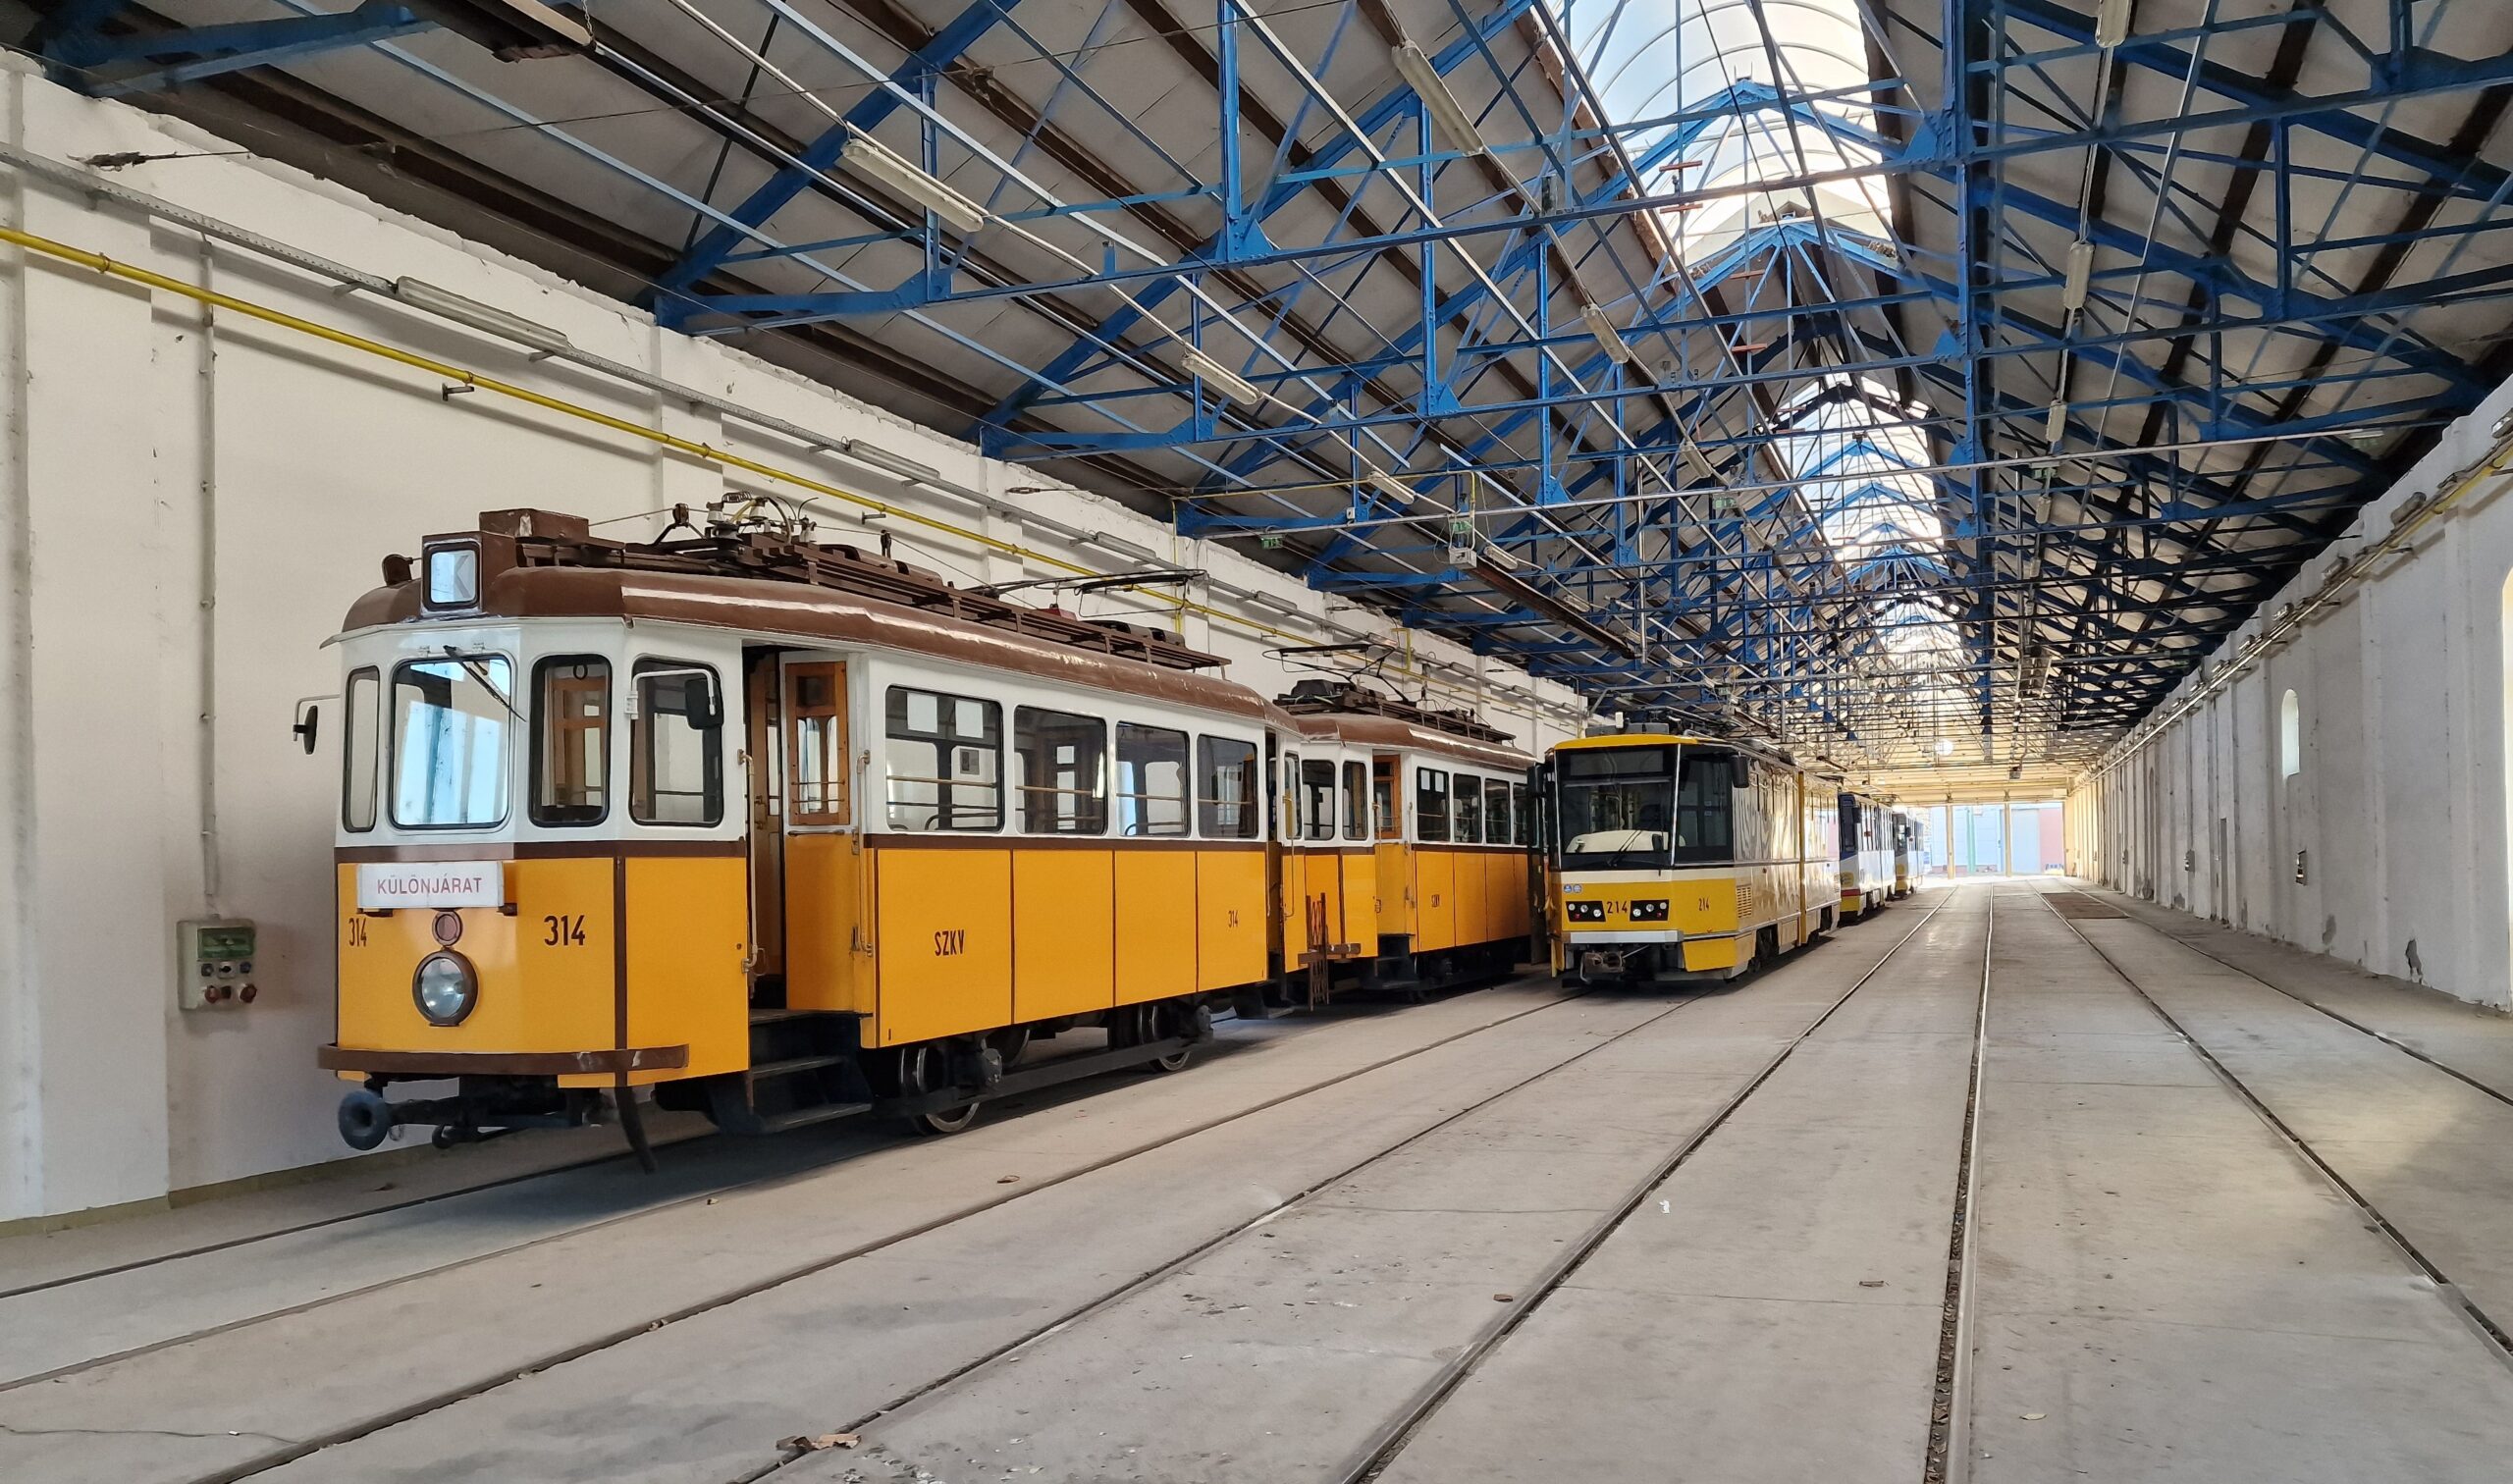 Site visit to the trolleybus depot in Szeged